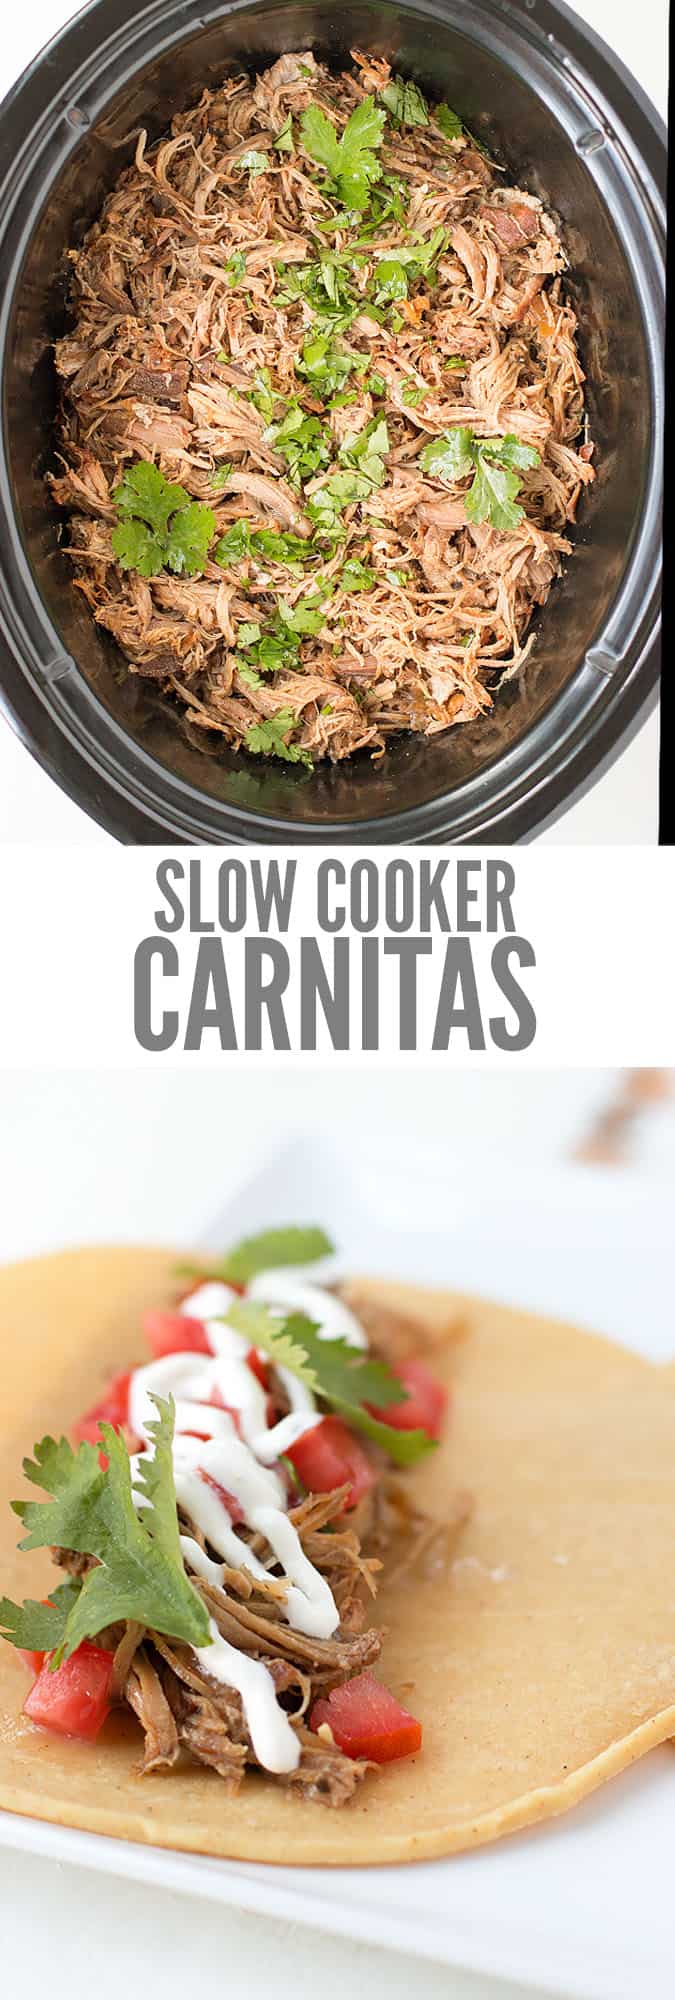 The Very Best Slow Cooker Carnitas | Authentic Pork Carnitas Recipe